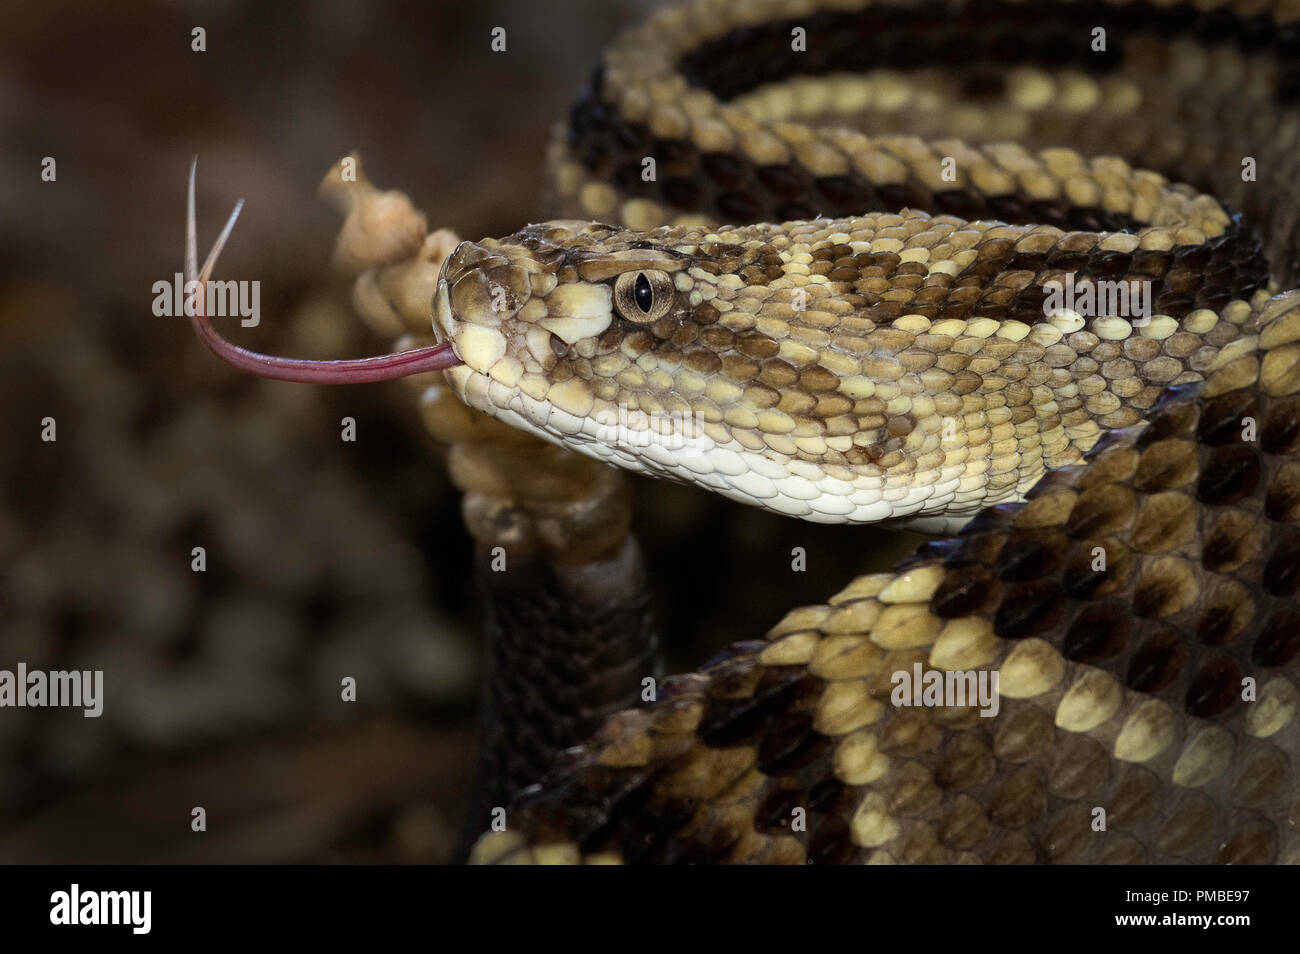 Portrait of a central american neotropical rattlesnake. Stock Photo